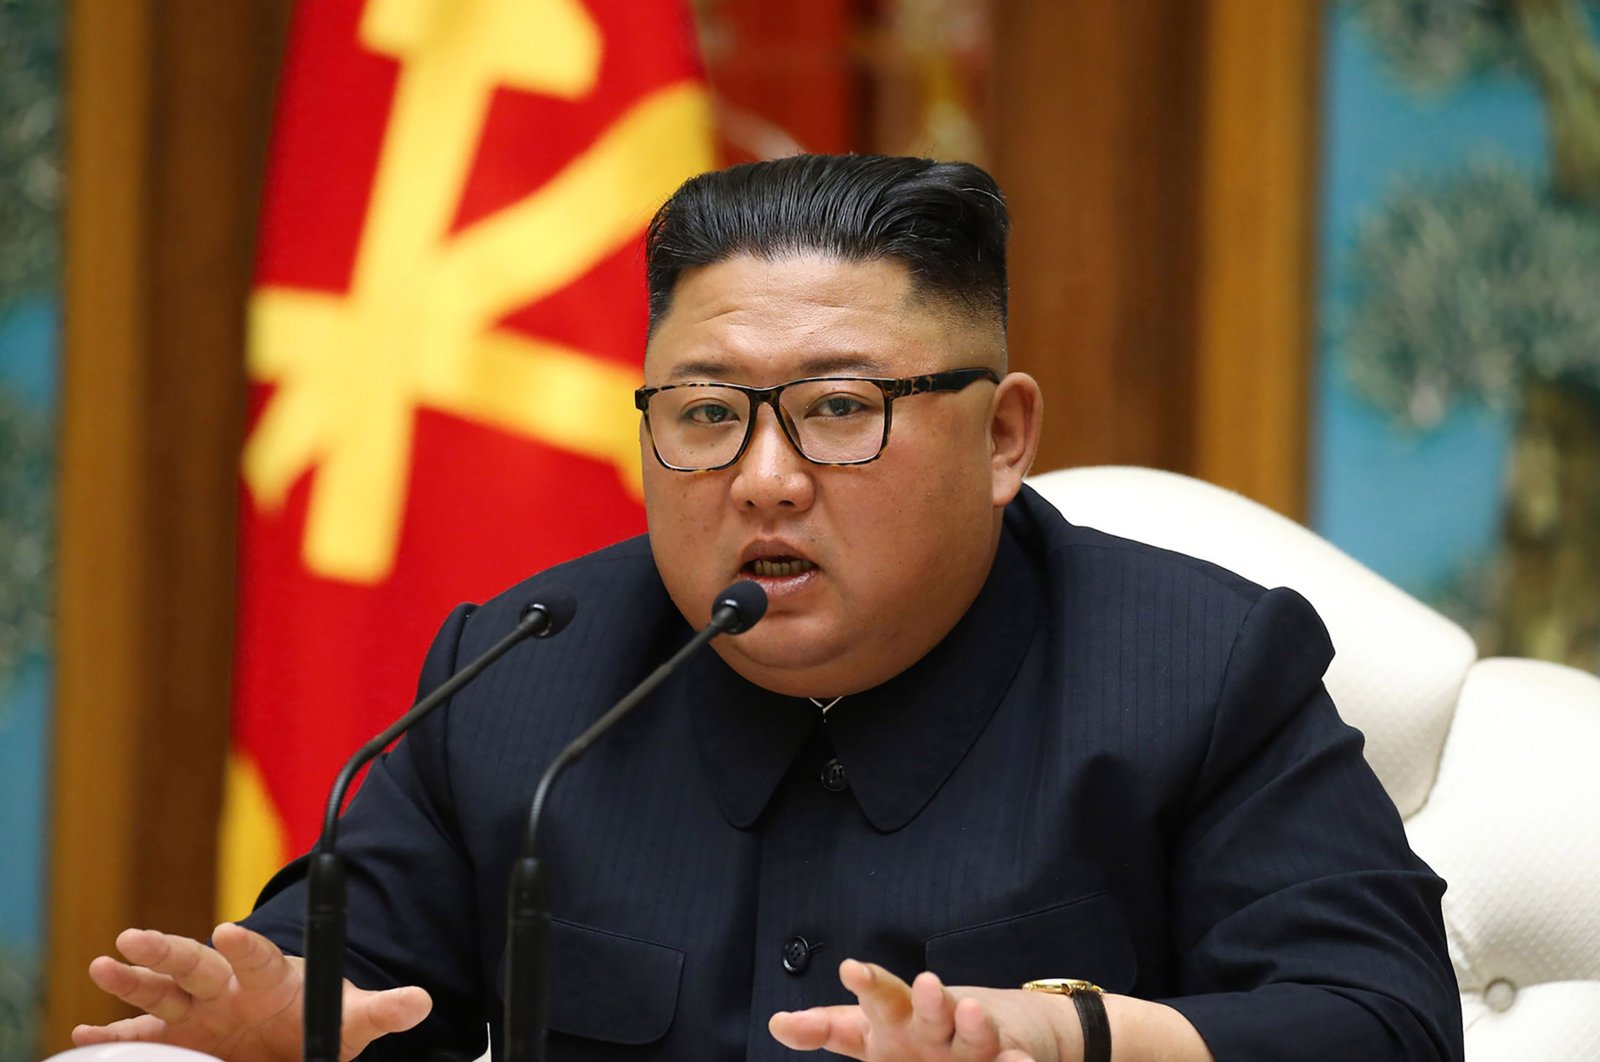 North Korean leader Kim Jong Un speaks during a meeting of the Political Bureau of the Central Committee of the Workers' Party of Korea (WPK), Pyongyang, North Korea, April 11, 2020. (AFP Photo)